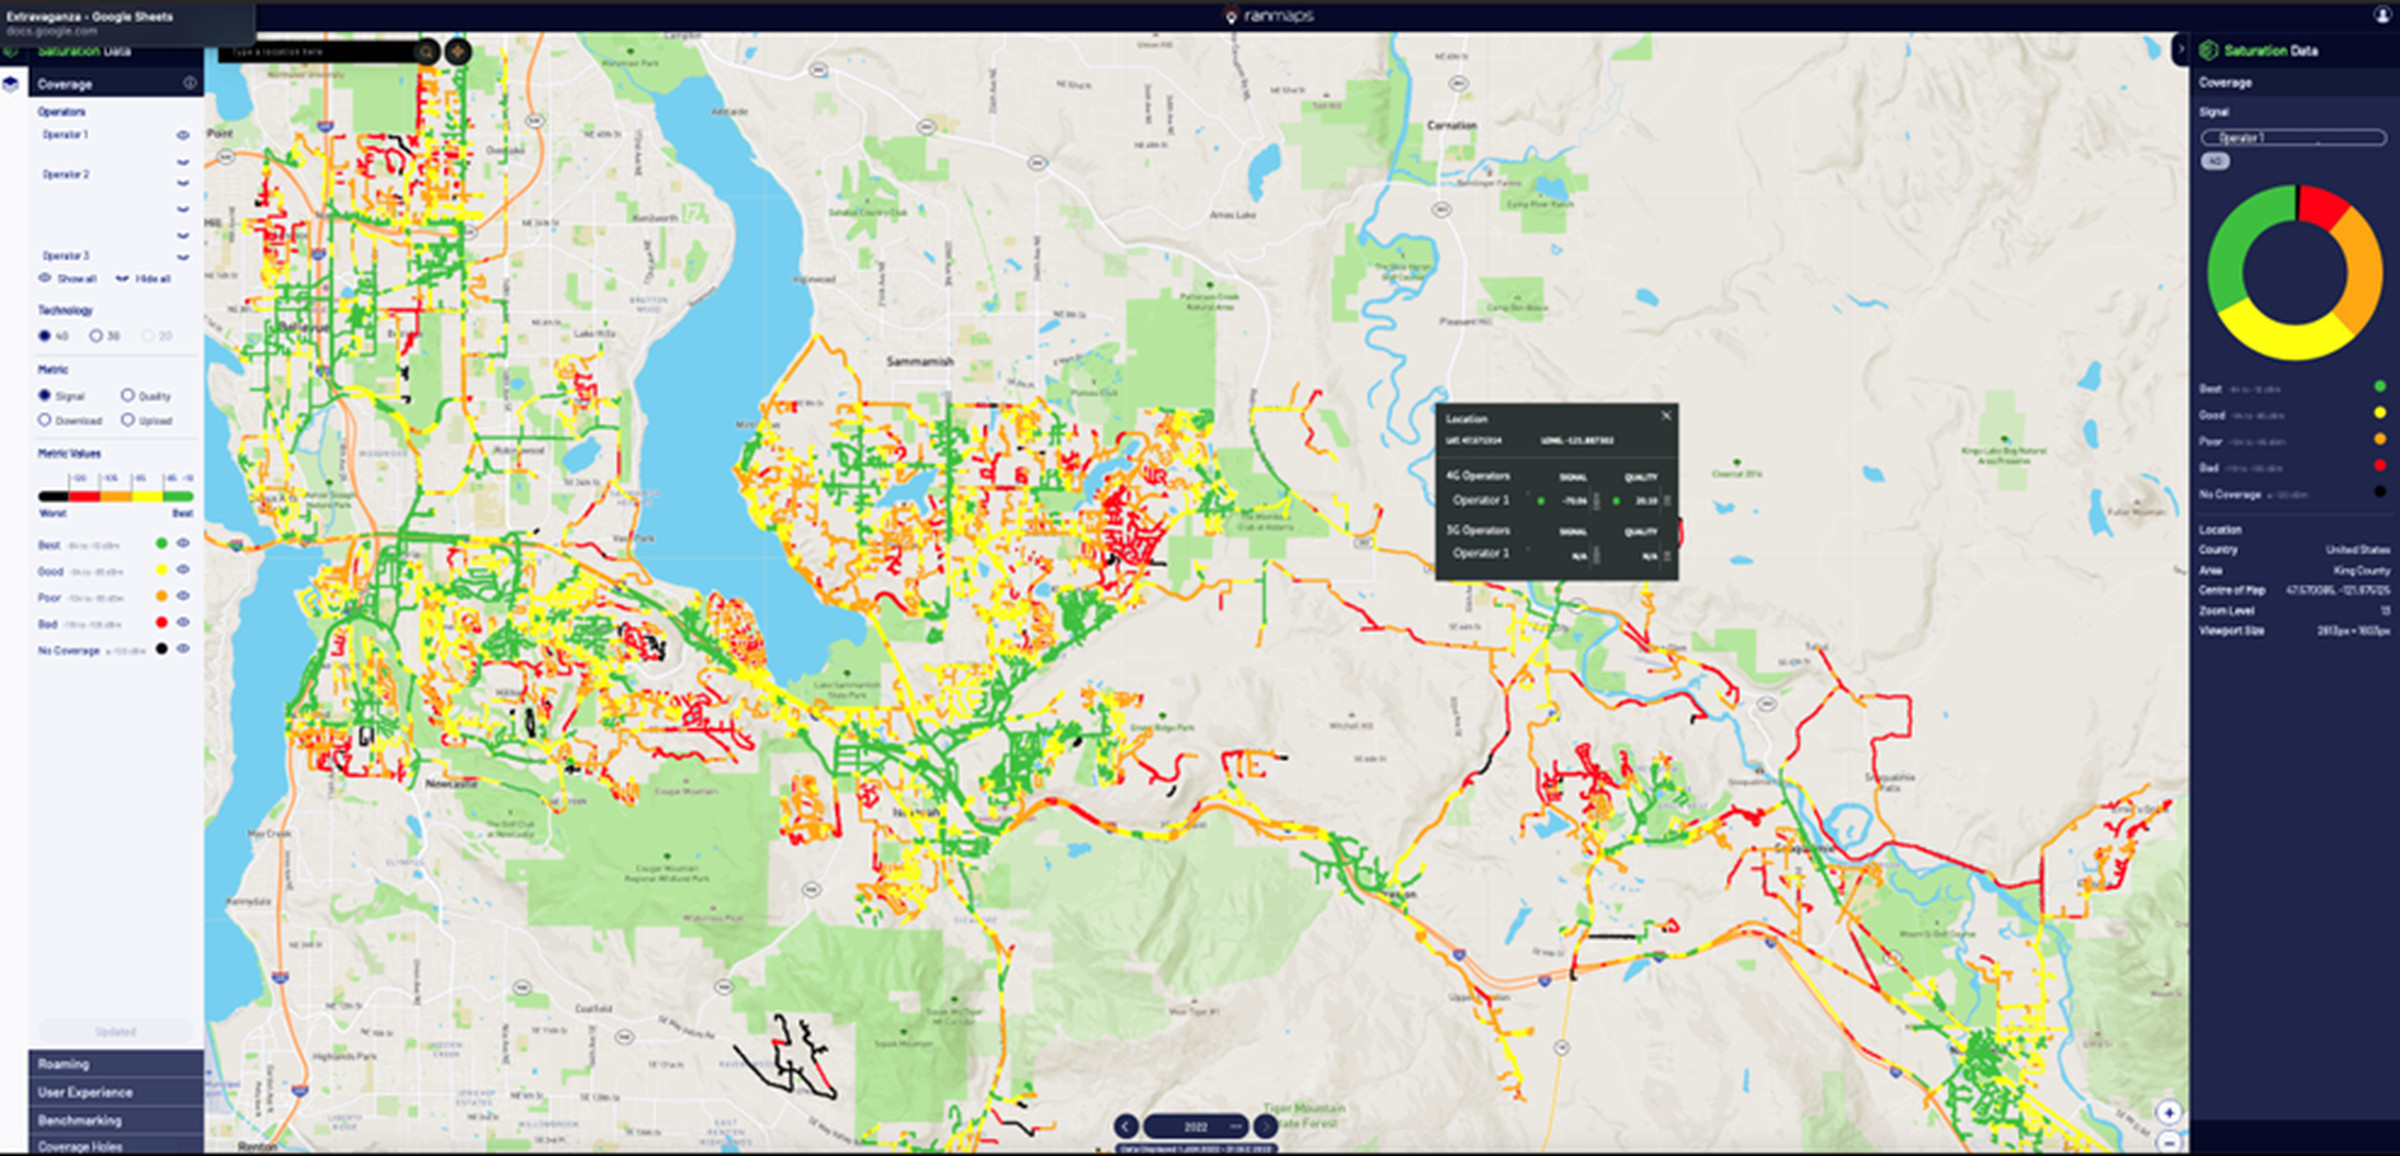 Image of a map showing cellular signal strength in Seattle.